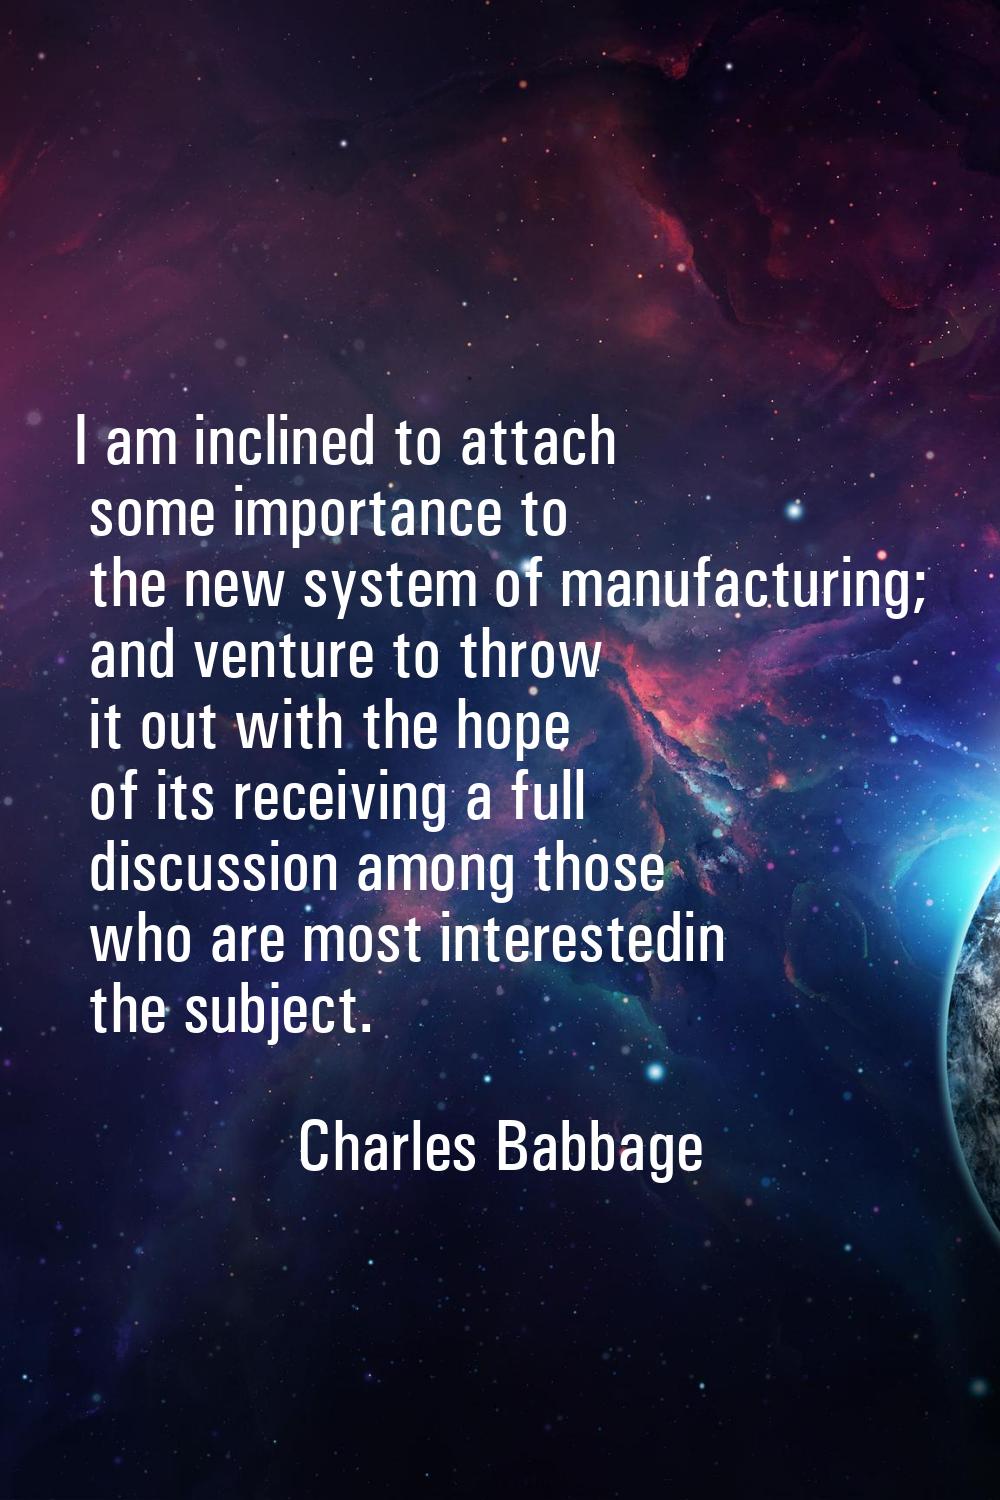 I am inclined to attach some importance to the new system of manufacturing; and venture to throw it